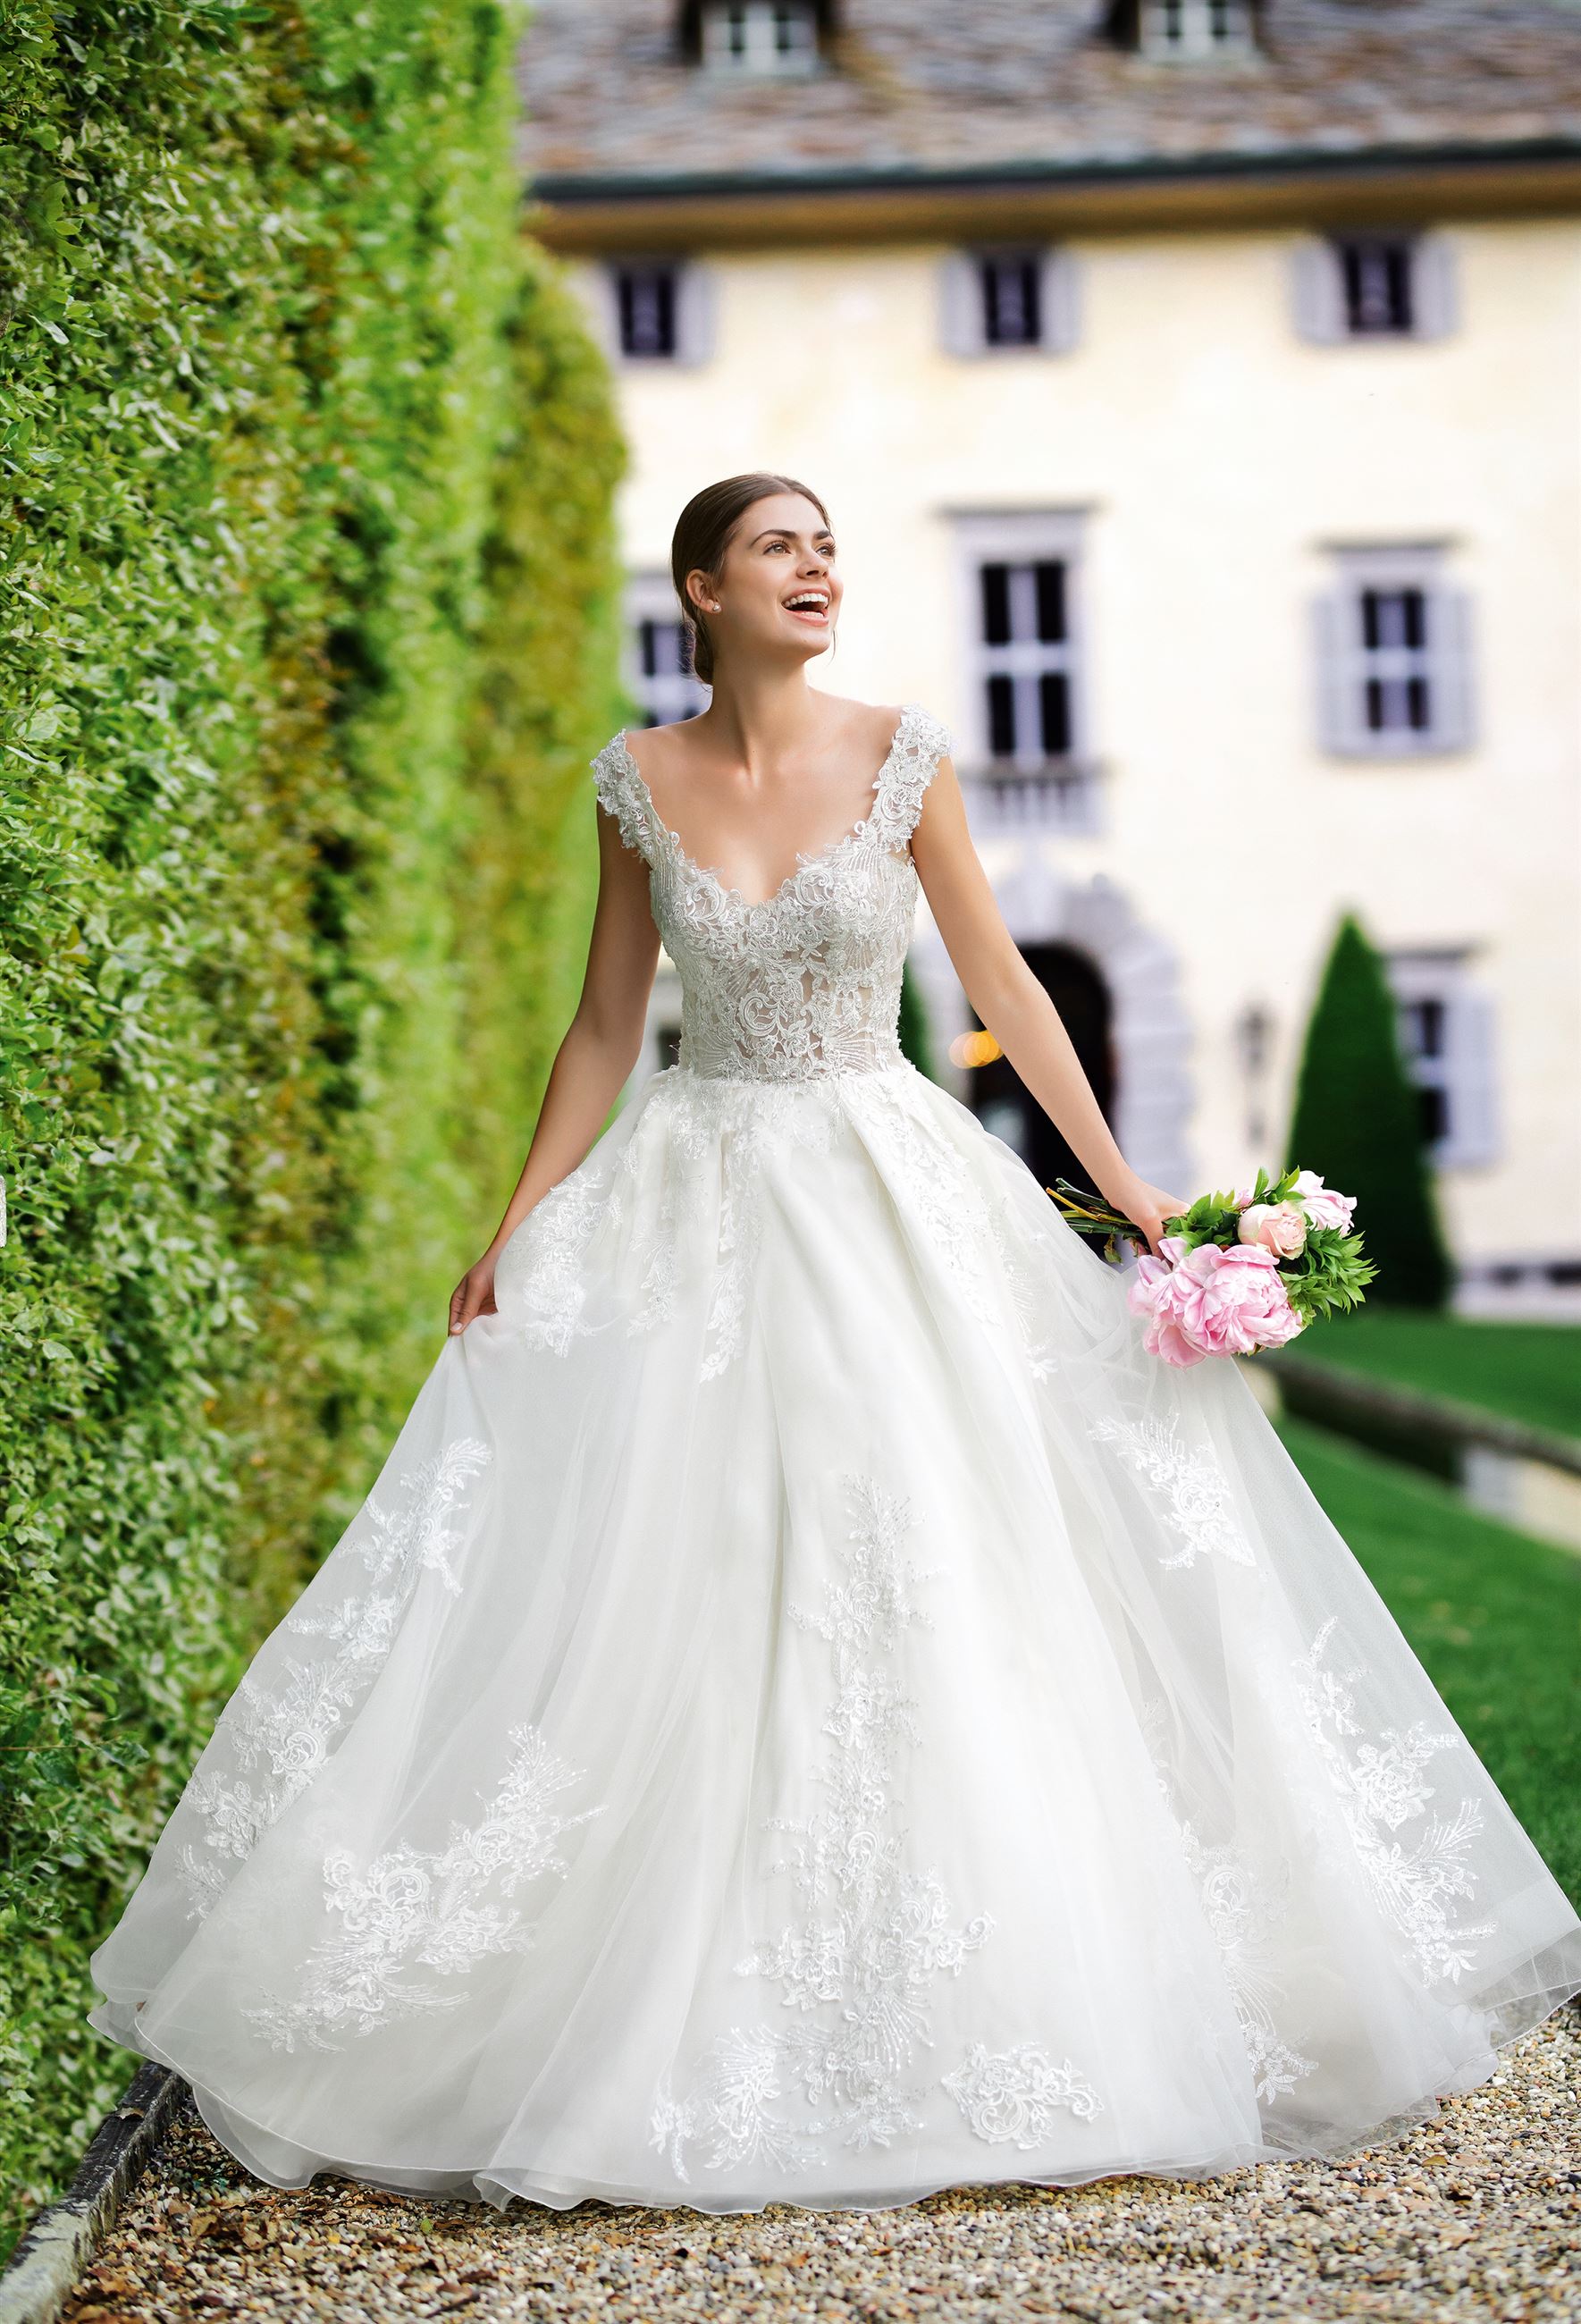 Is The Ball Gown Wedding Dress Right For You?. Mobile Image